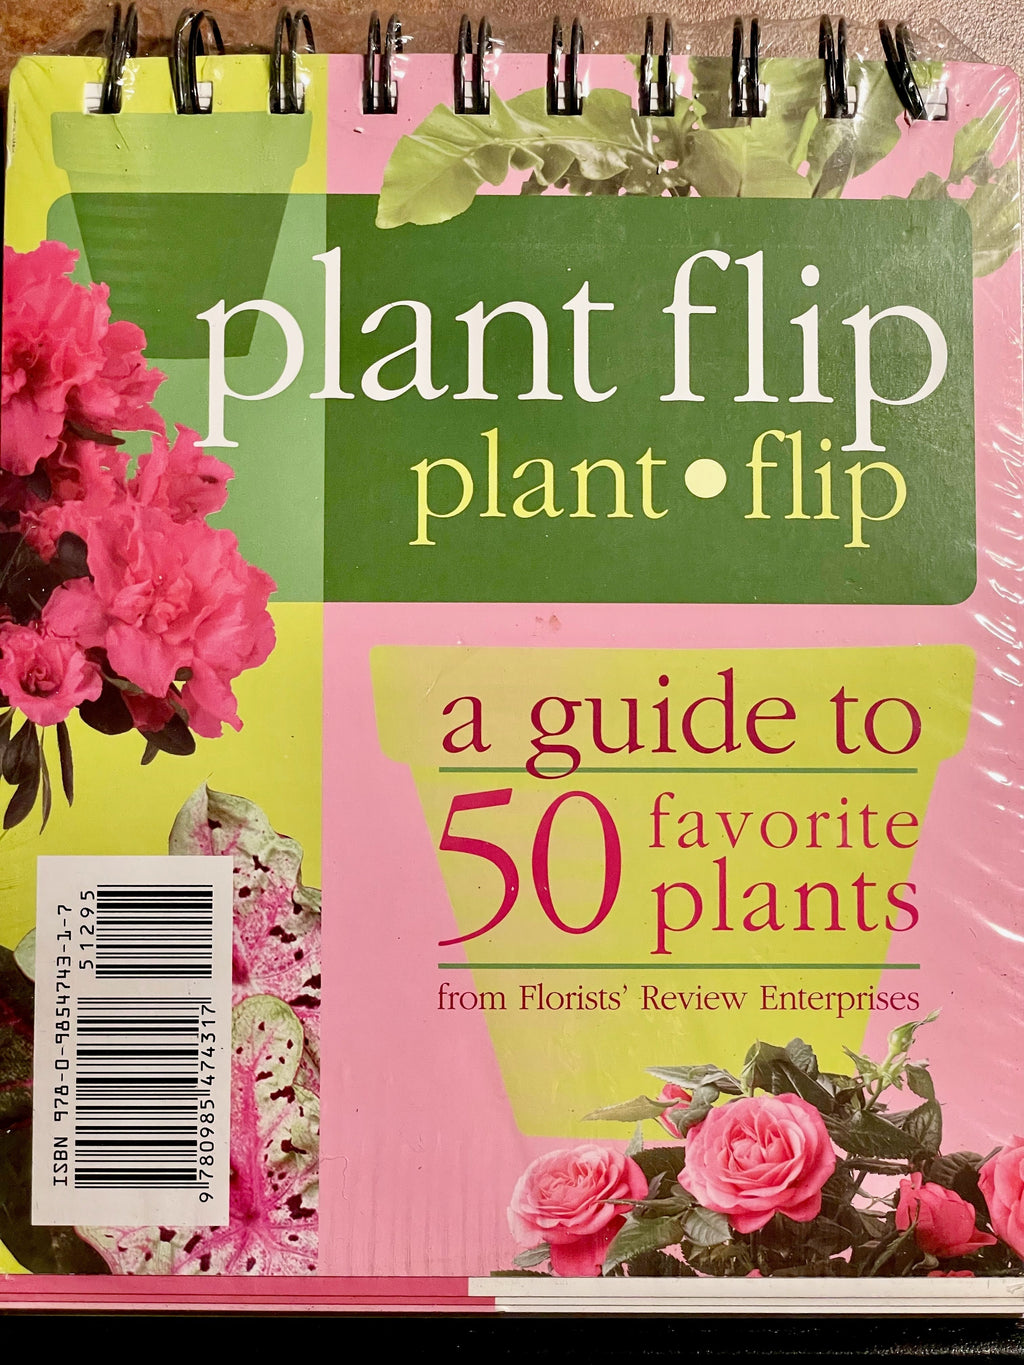 Plant Flip: A Guide to 50 Favorite Plants by Florists’ Review - FlowerBox